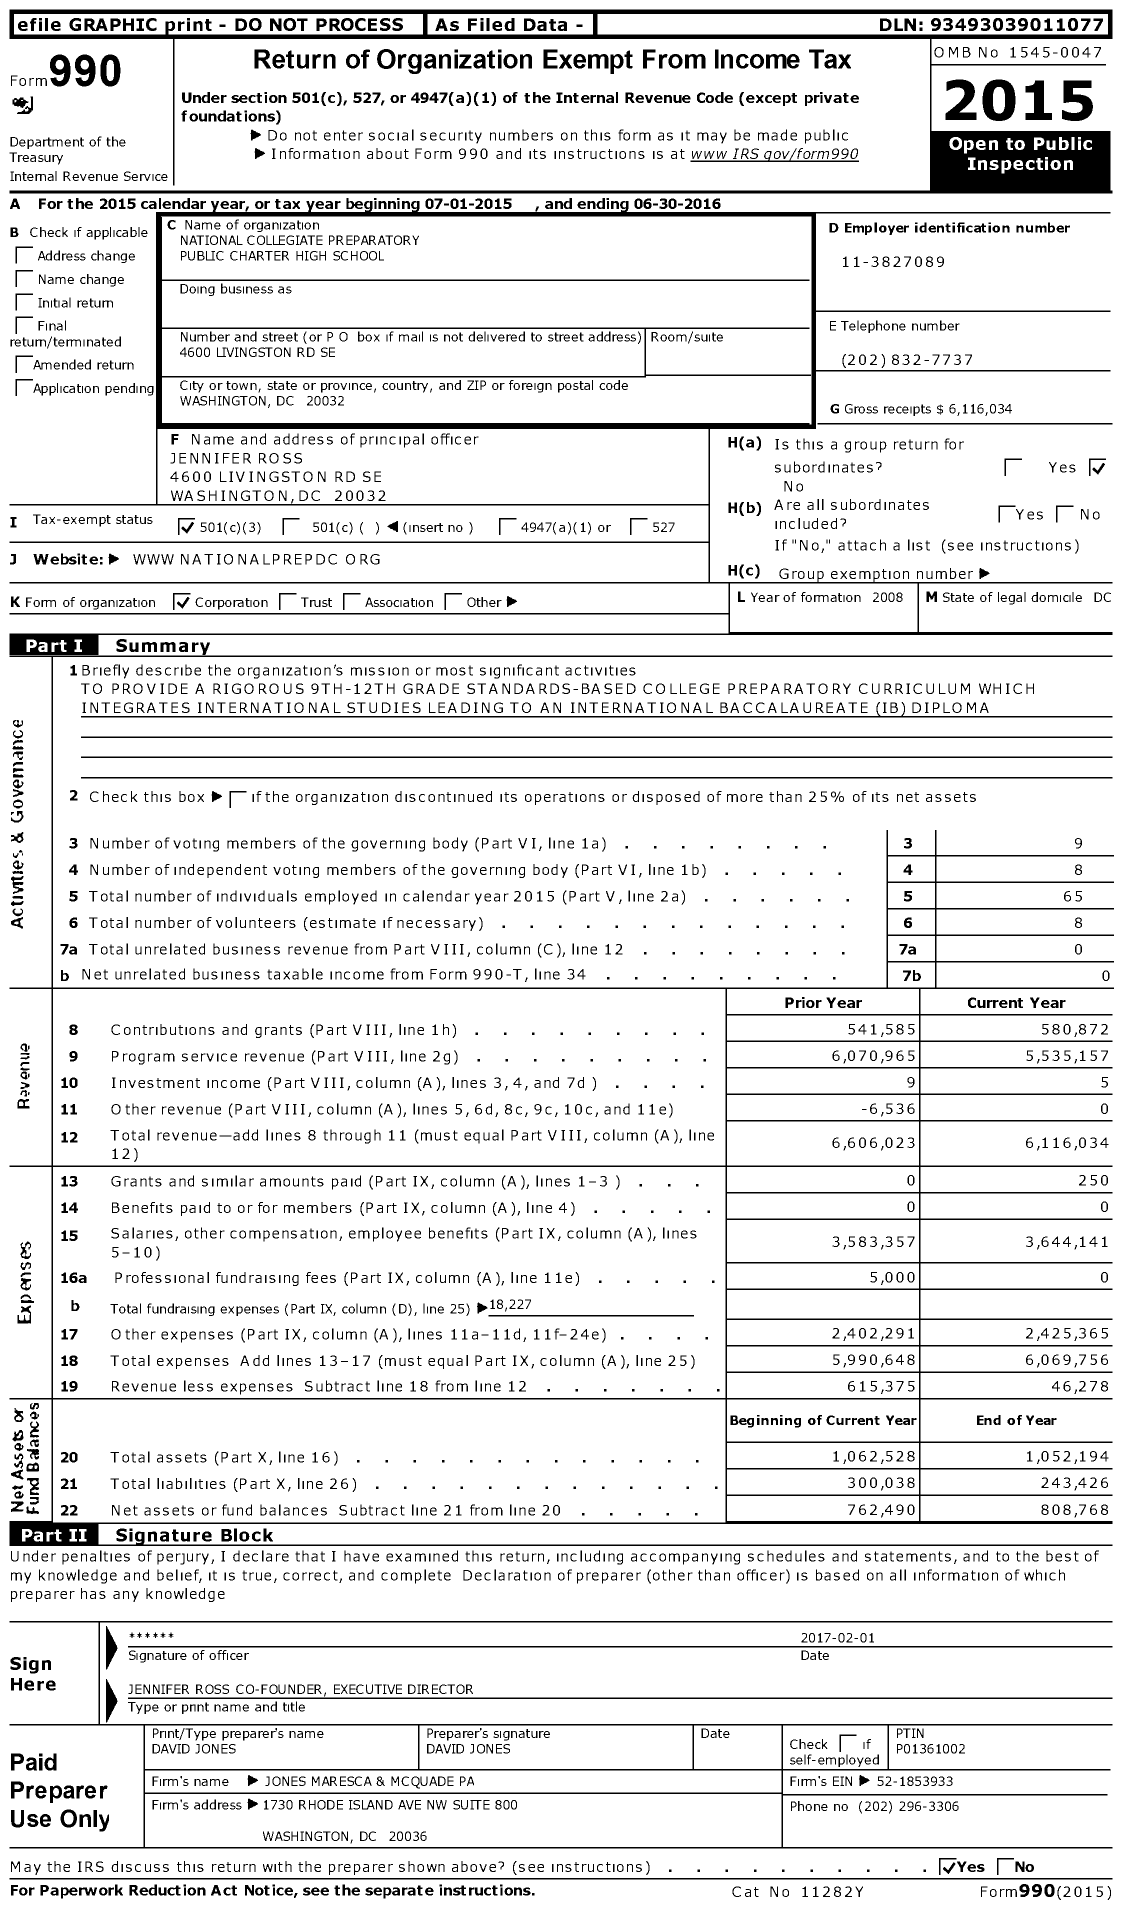 Image of first page of 2015 Form 990 for National Collegiate Preparatory Public Charter High School